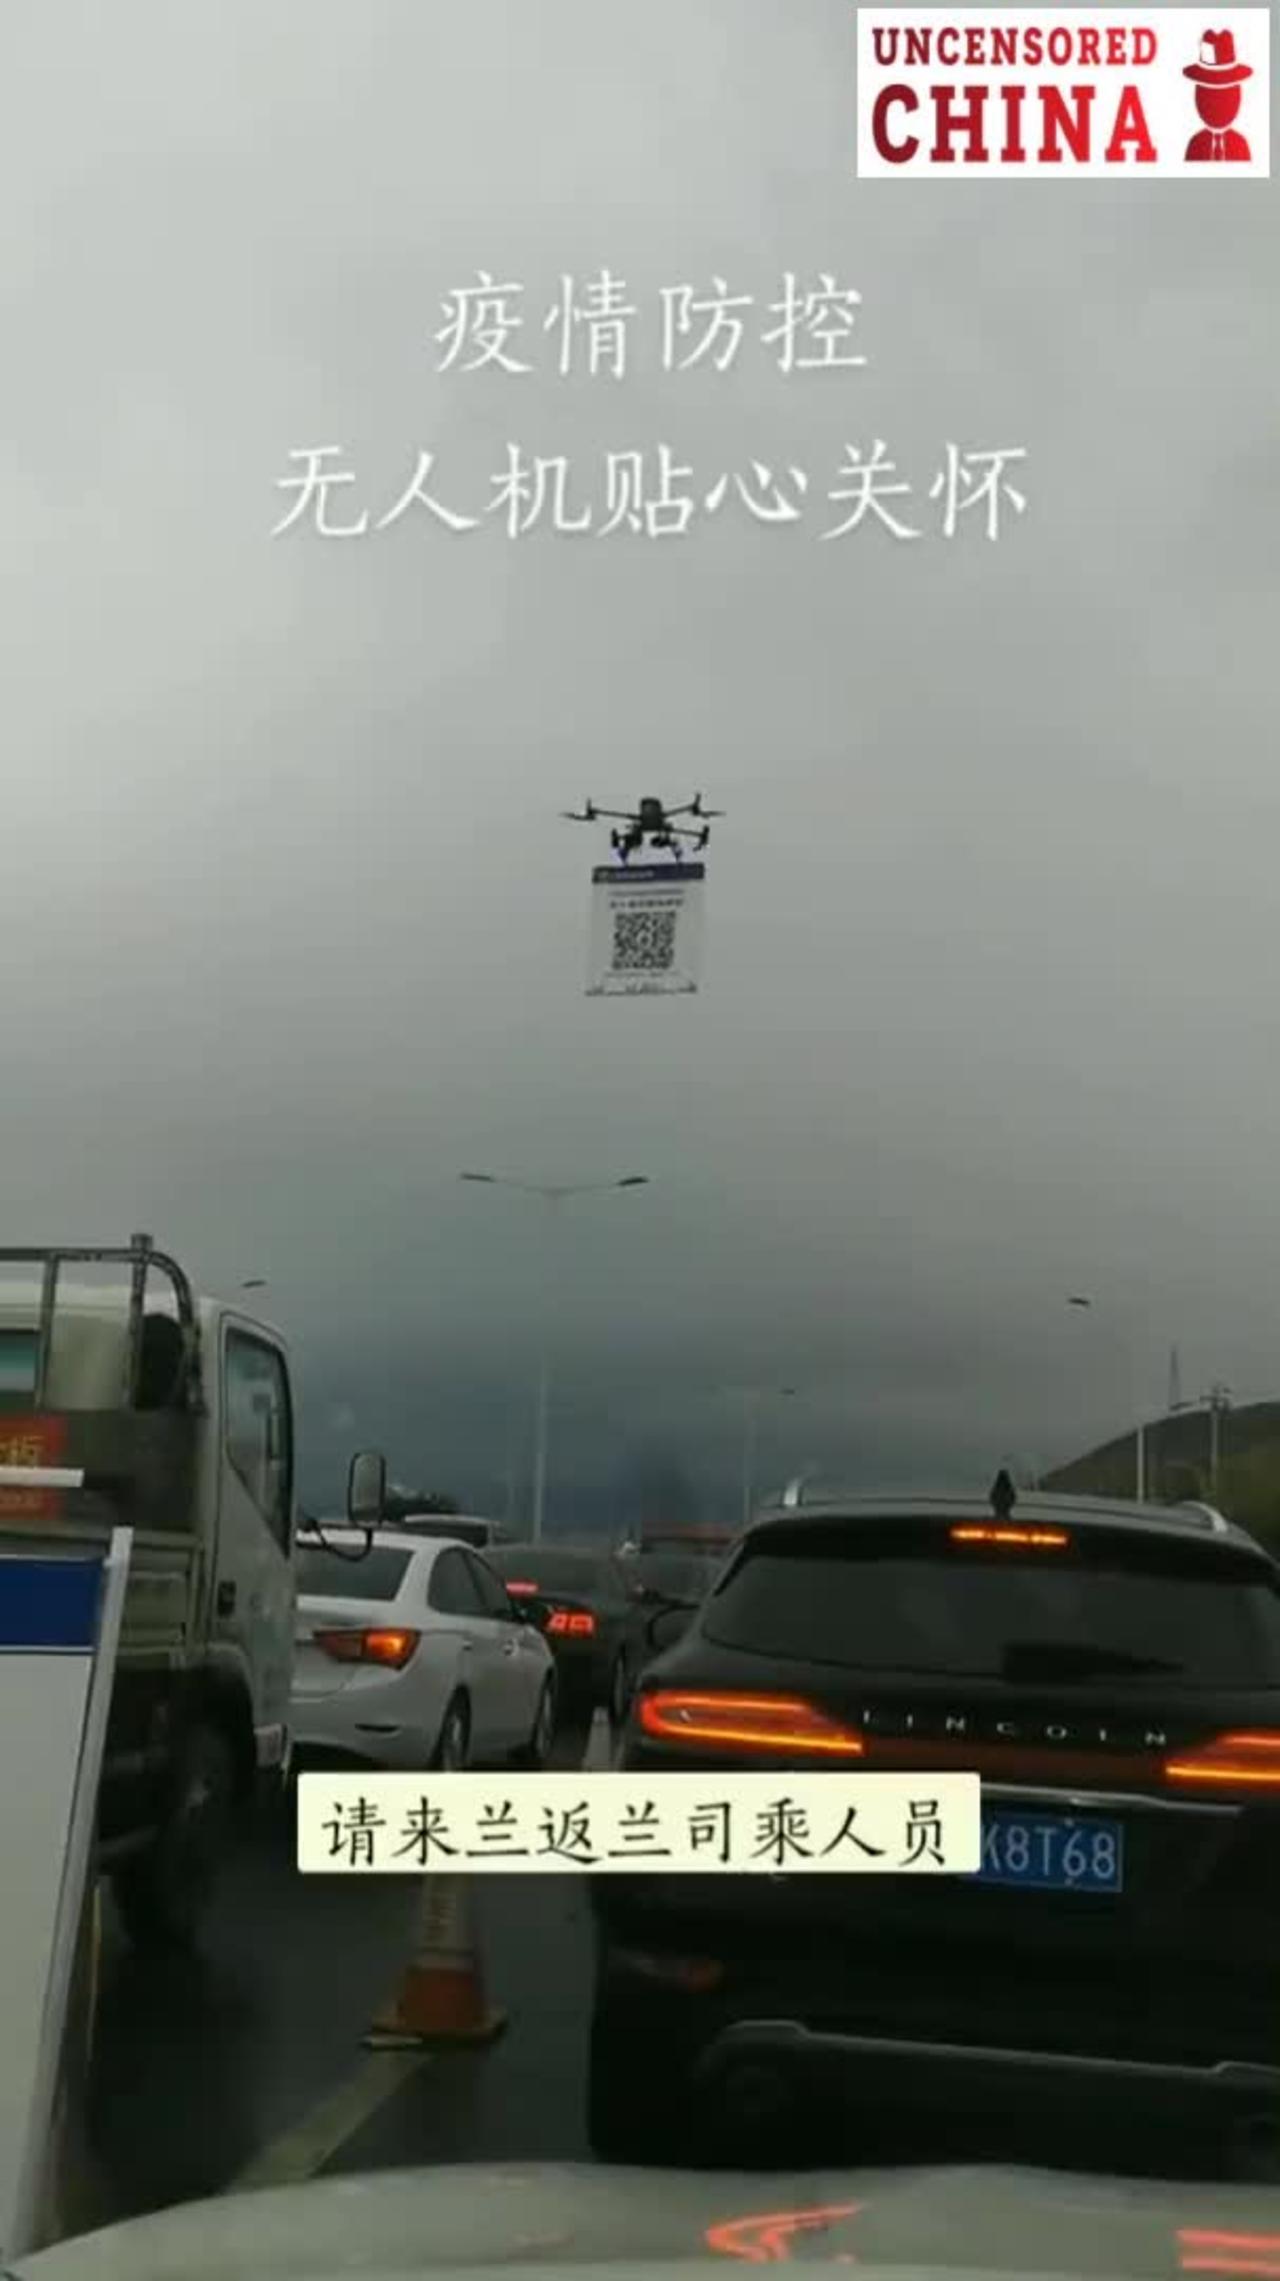 China: a police drone comes towards you on the highway, you need to quickly scan the QR code